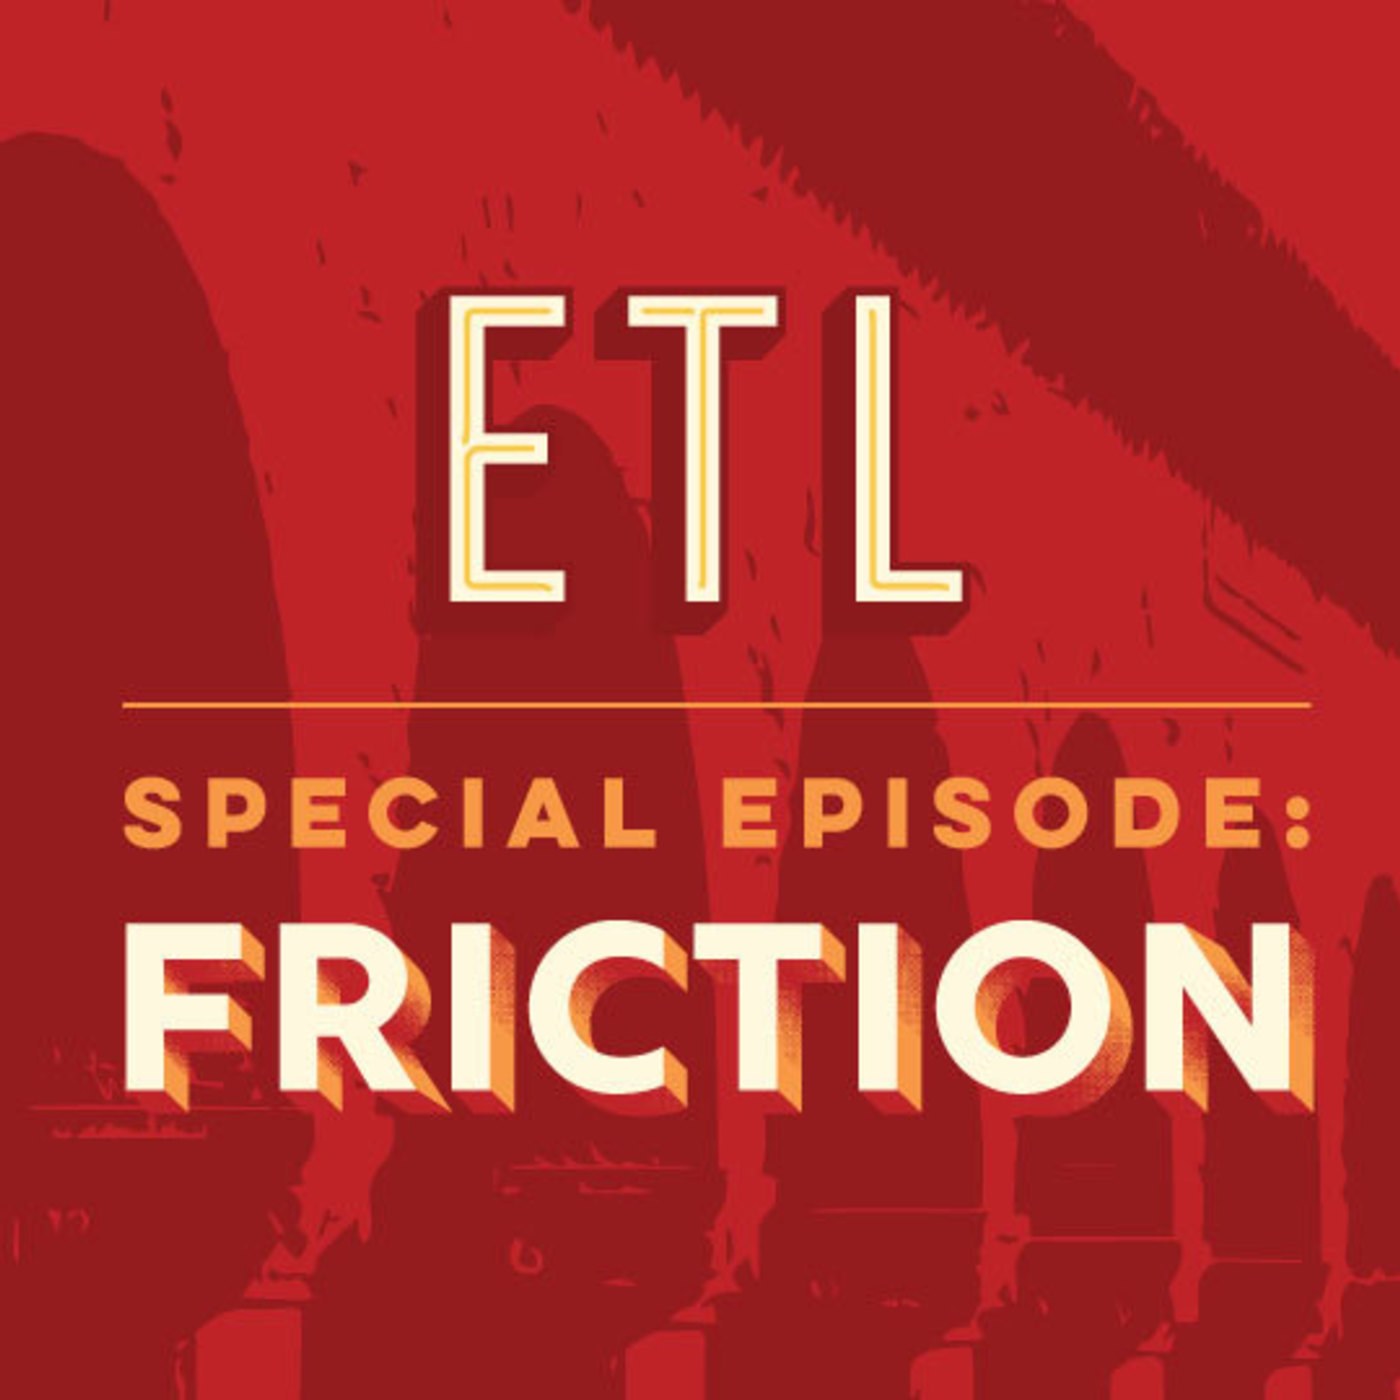 Bob Sutton (Stanford University), Patty McCord (Patty McCord Consulting) - ETL Takeover: A Taste of FRICTION